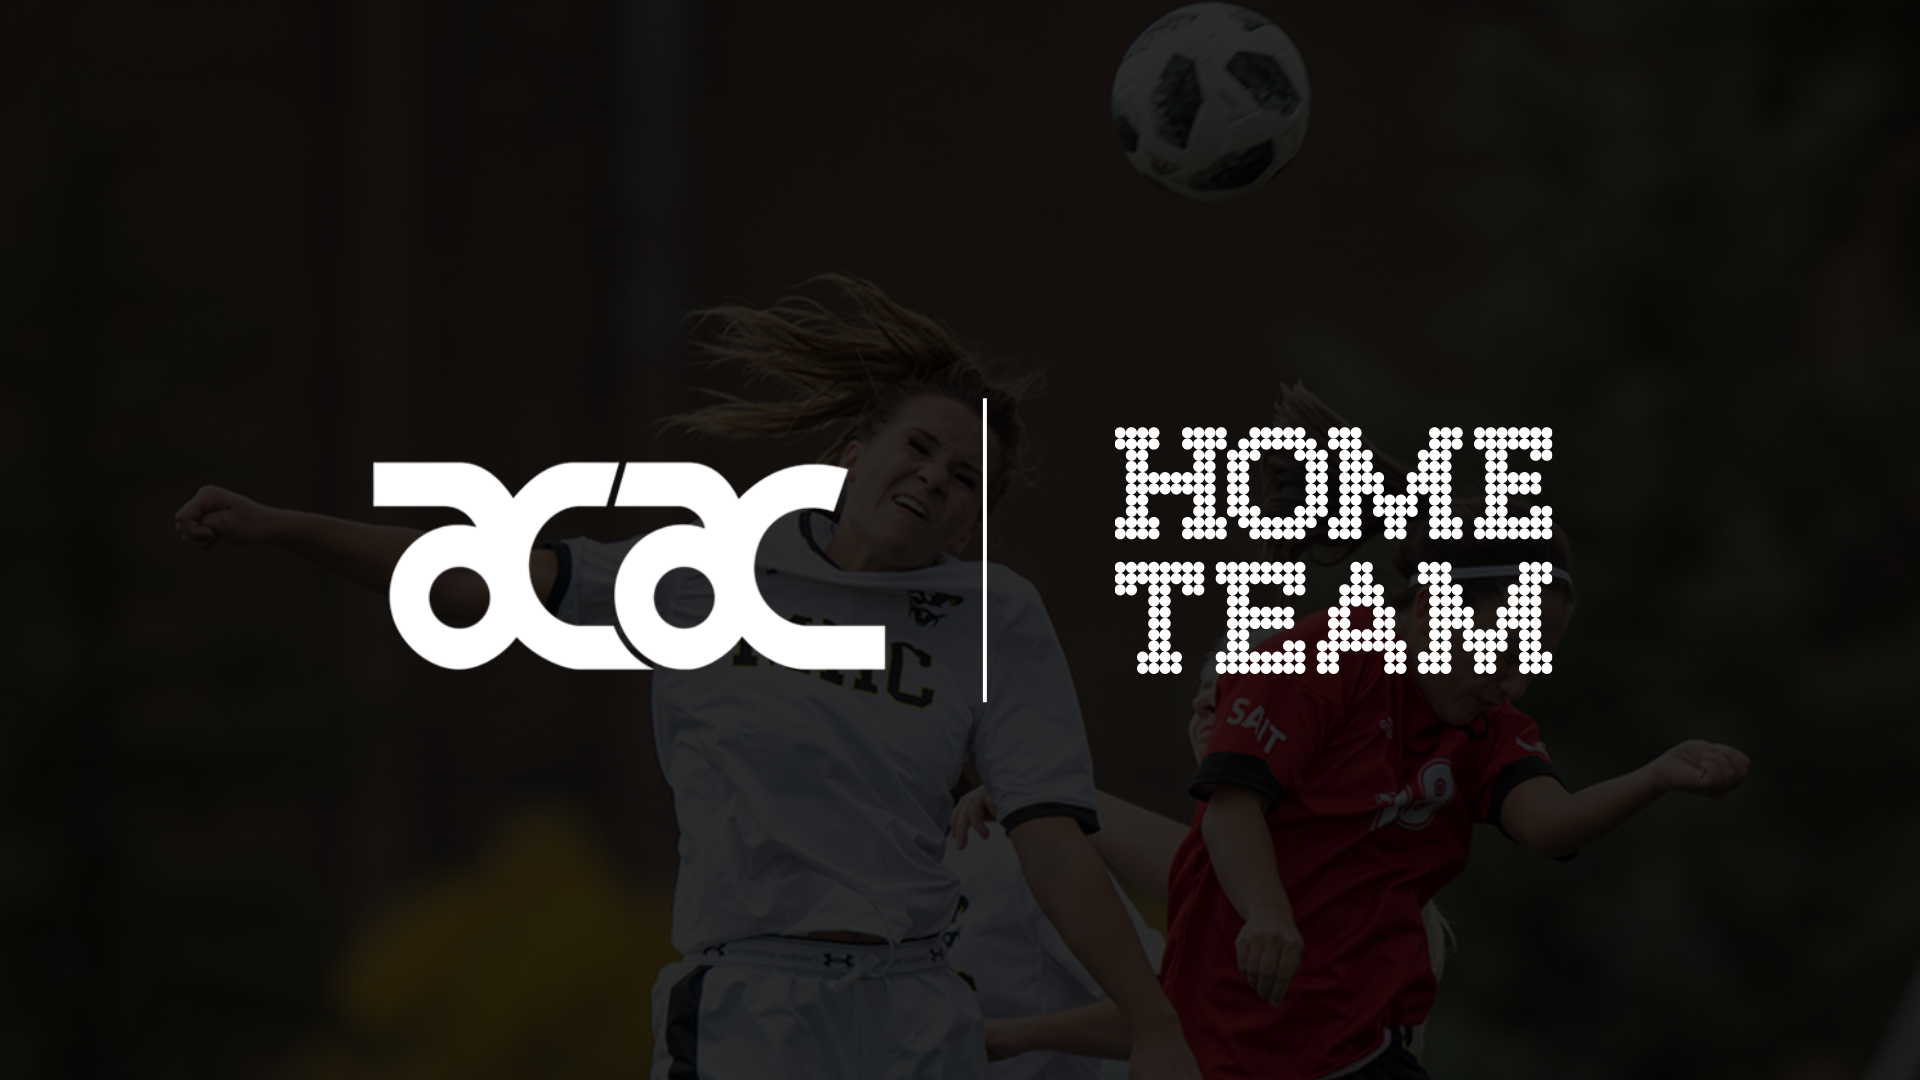 HomeTeam Live and ACAC agree to stream 2022 Soccer Matches — HomeTeam